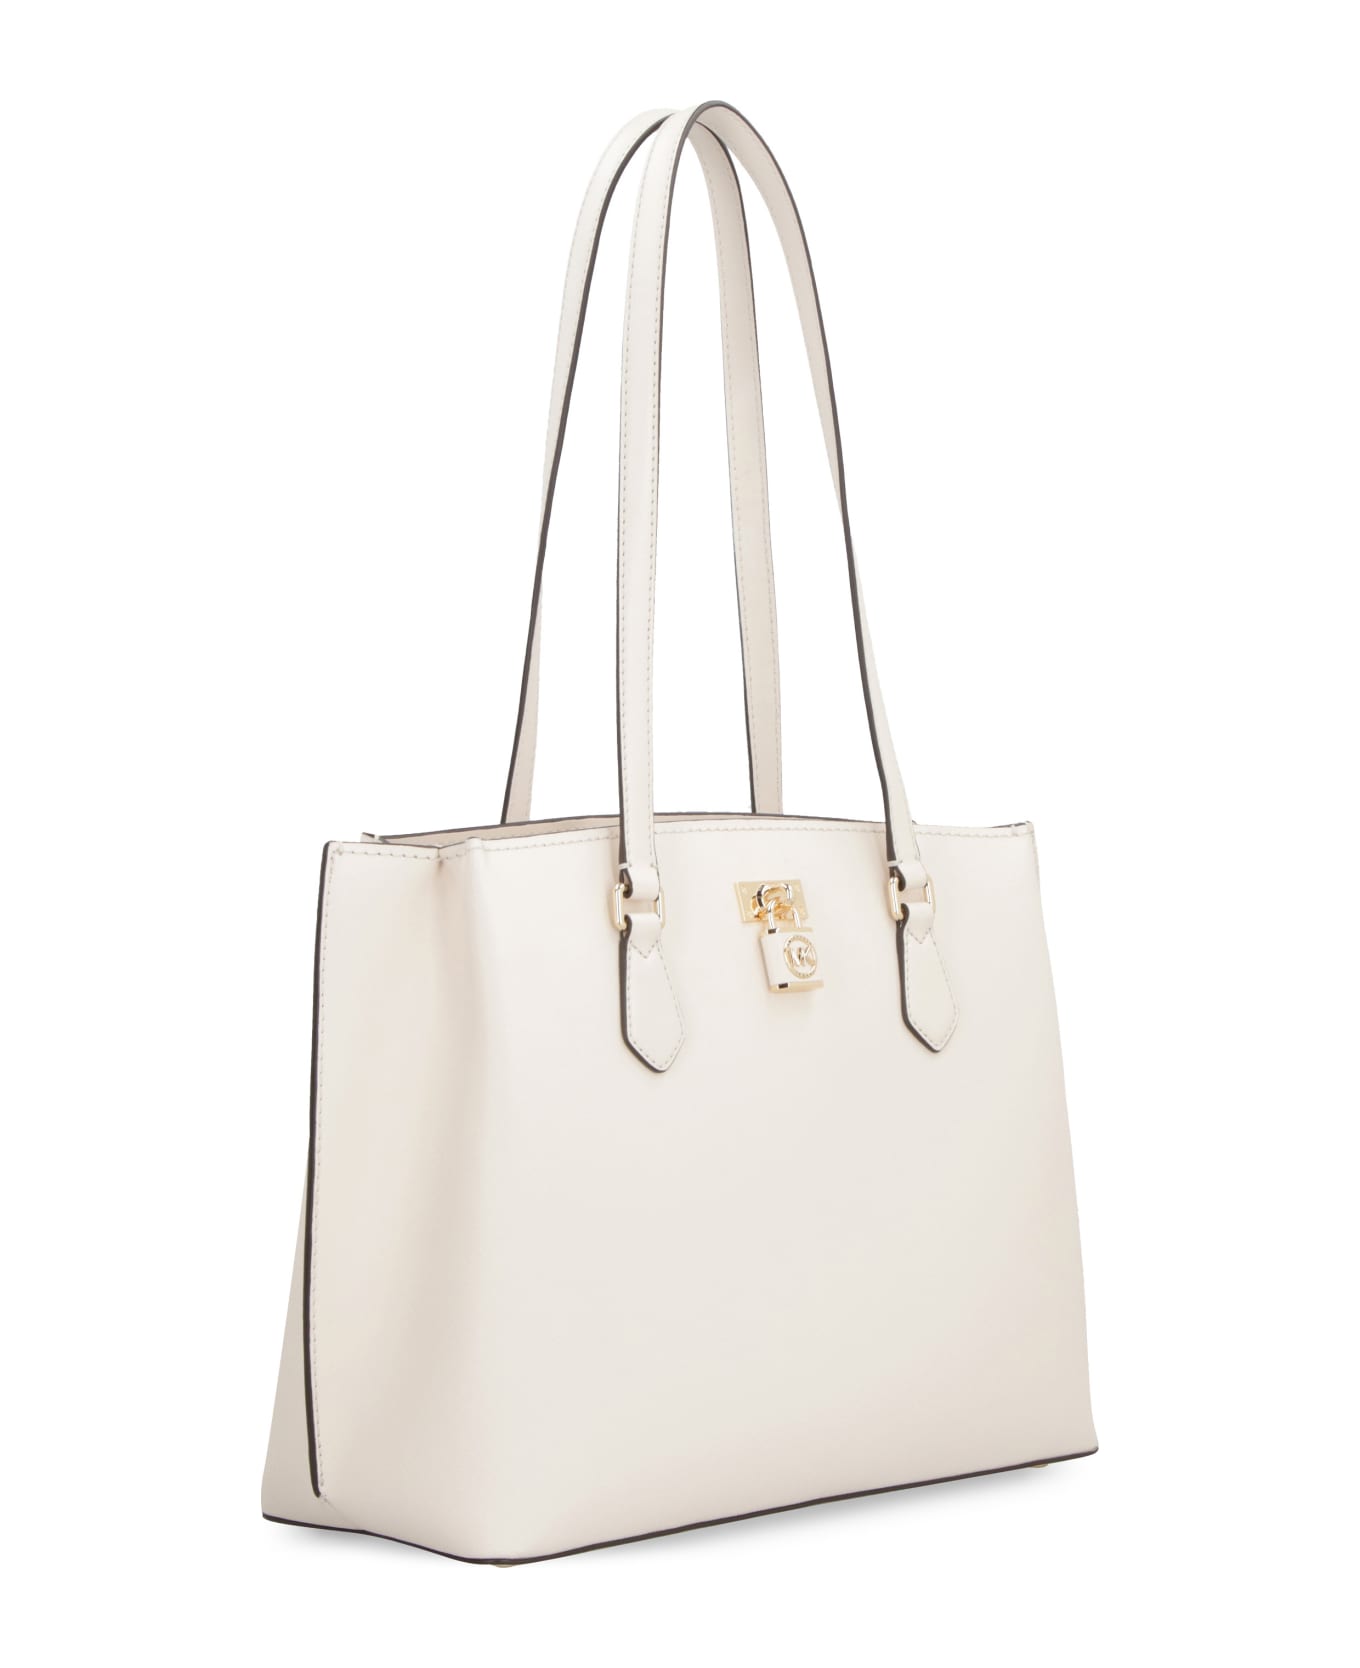 MICHAEL Michael Kors Ruby Leather Tote - Ivory